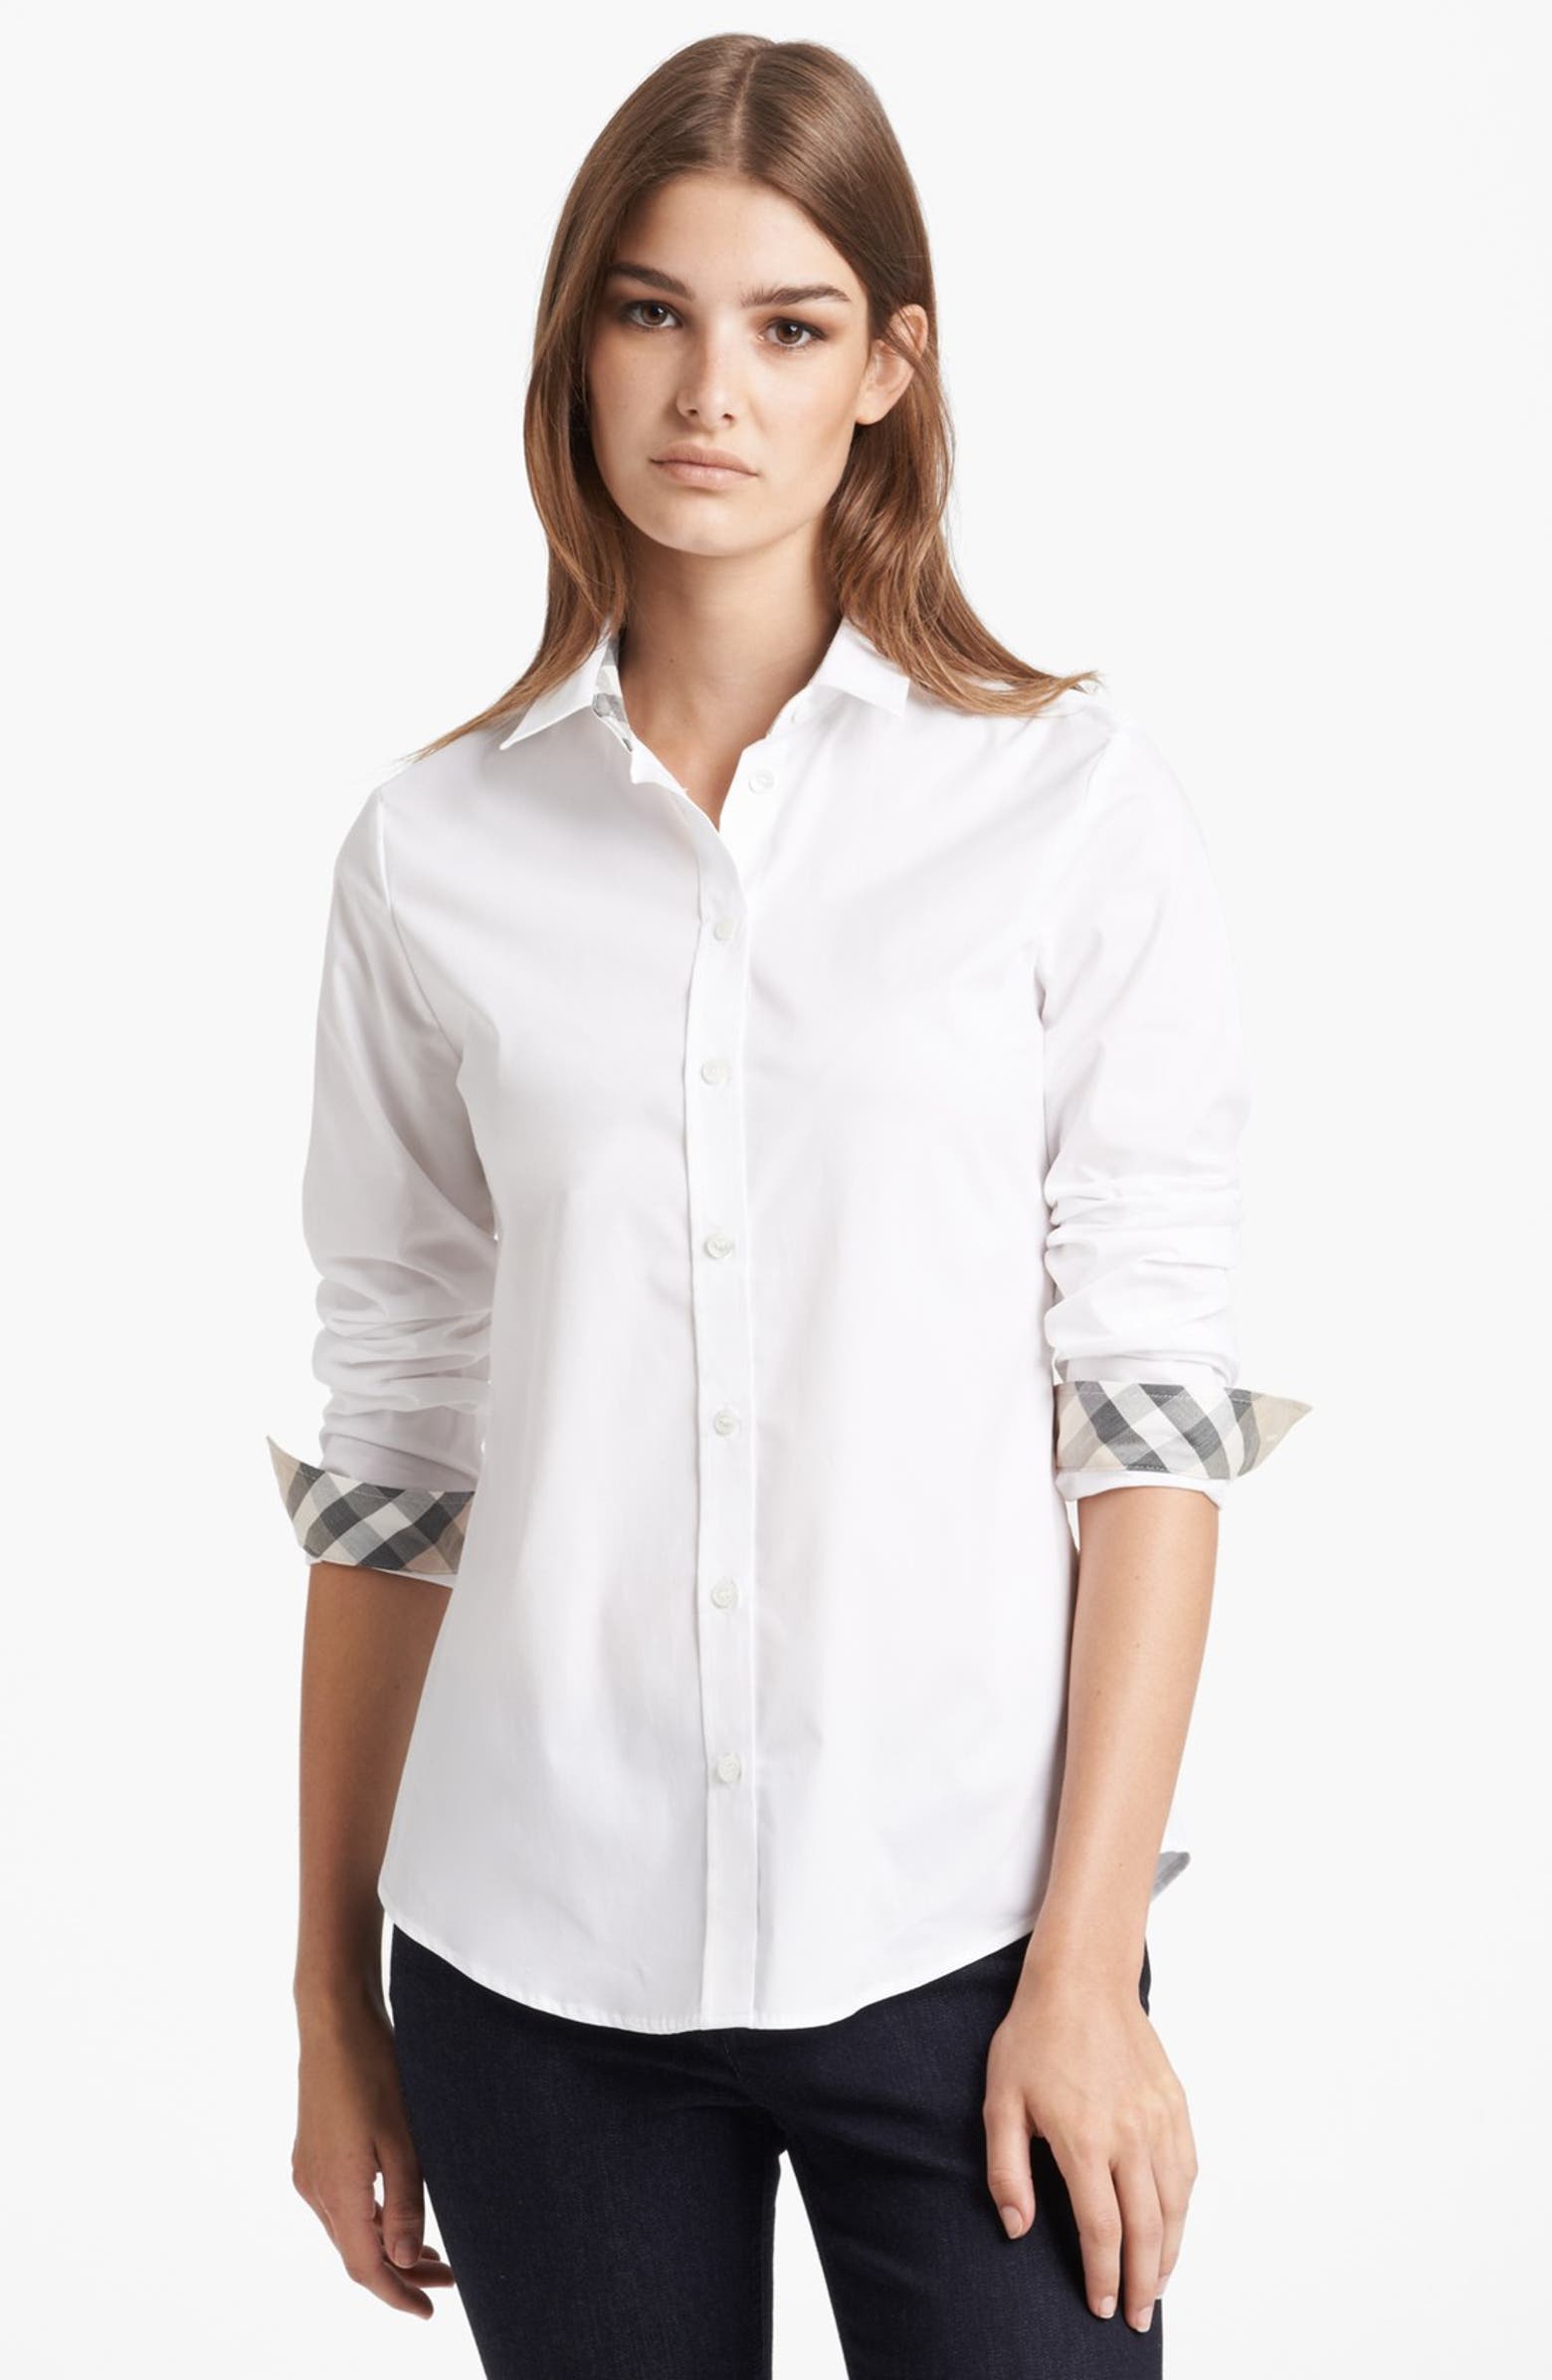 Burberry Brit Shirt with Check Contrast | Nordstrom